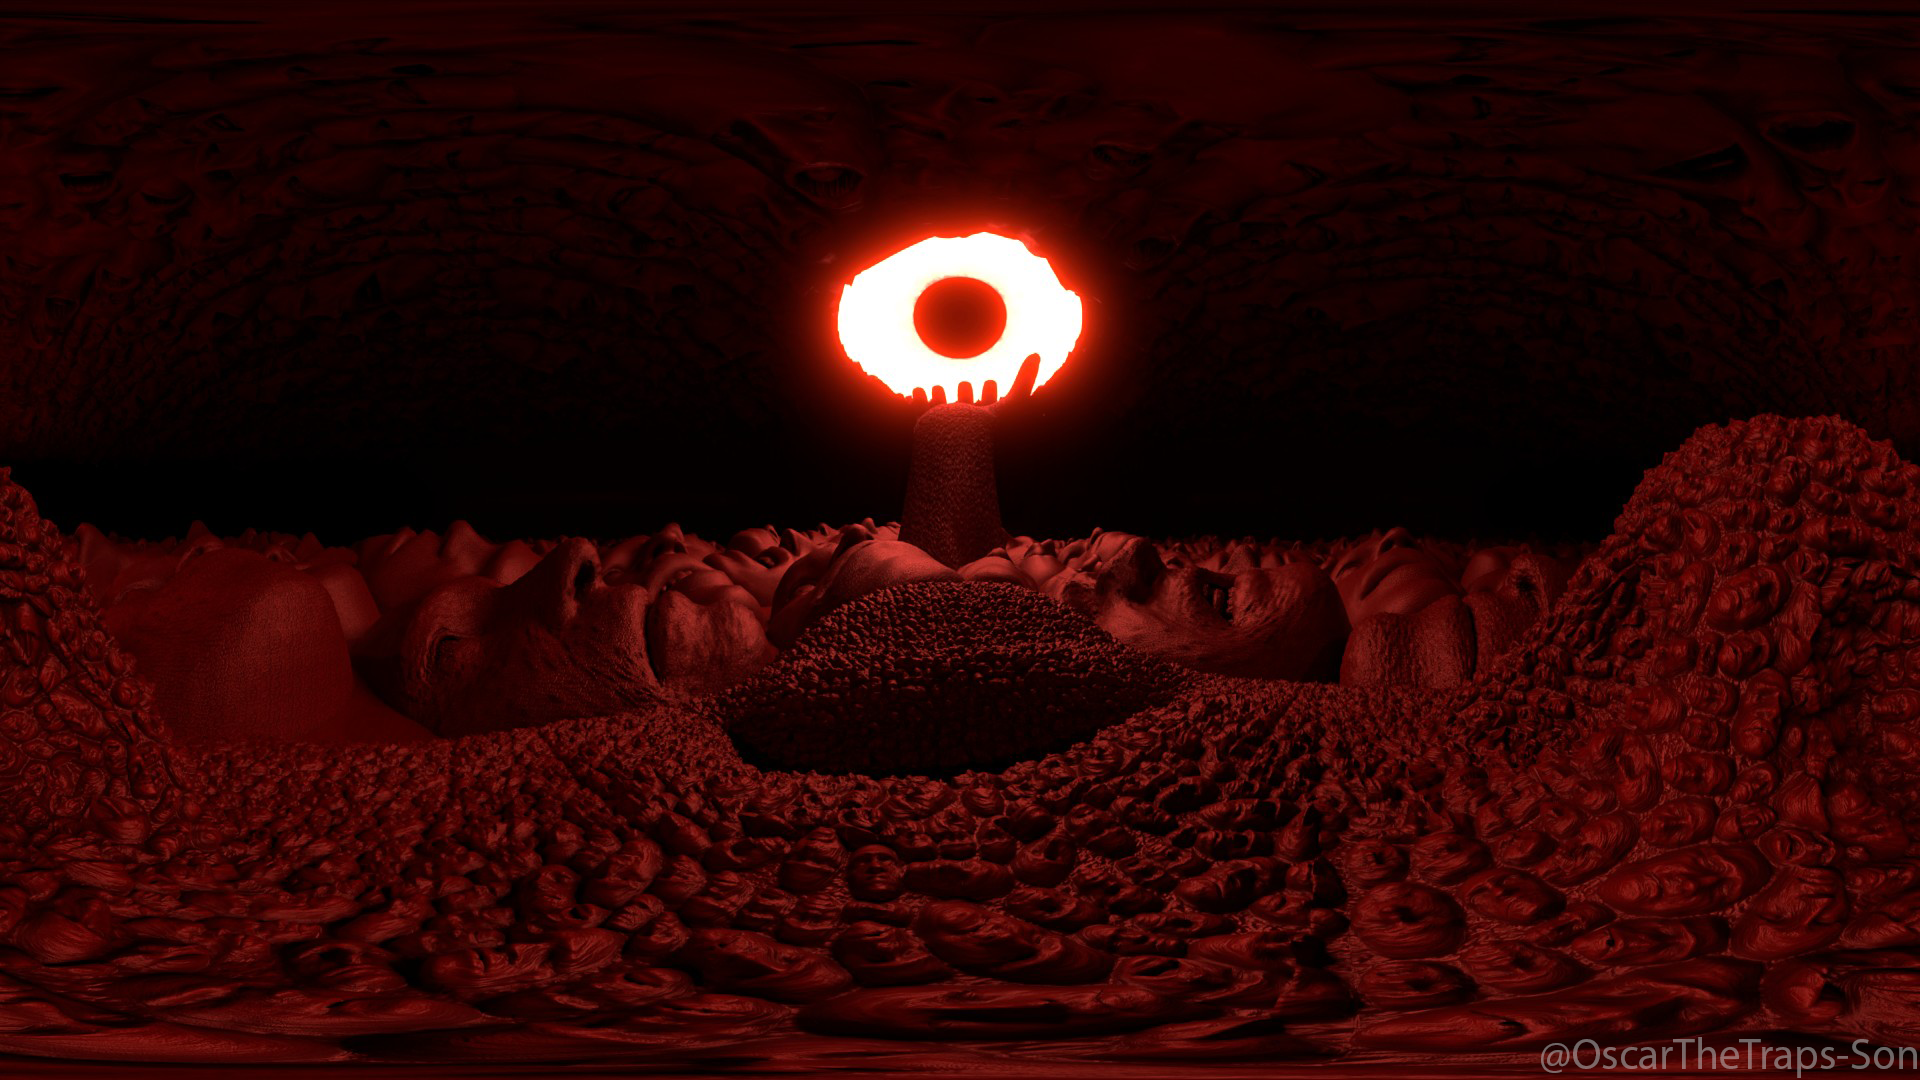 I have recreated the eclipse as an HDRI. More details in comments. Thoughts?: Berserk